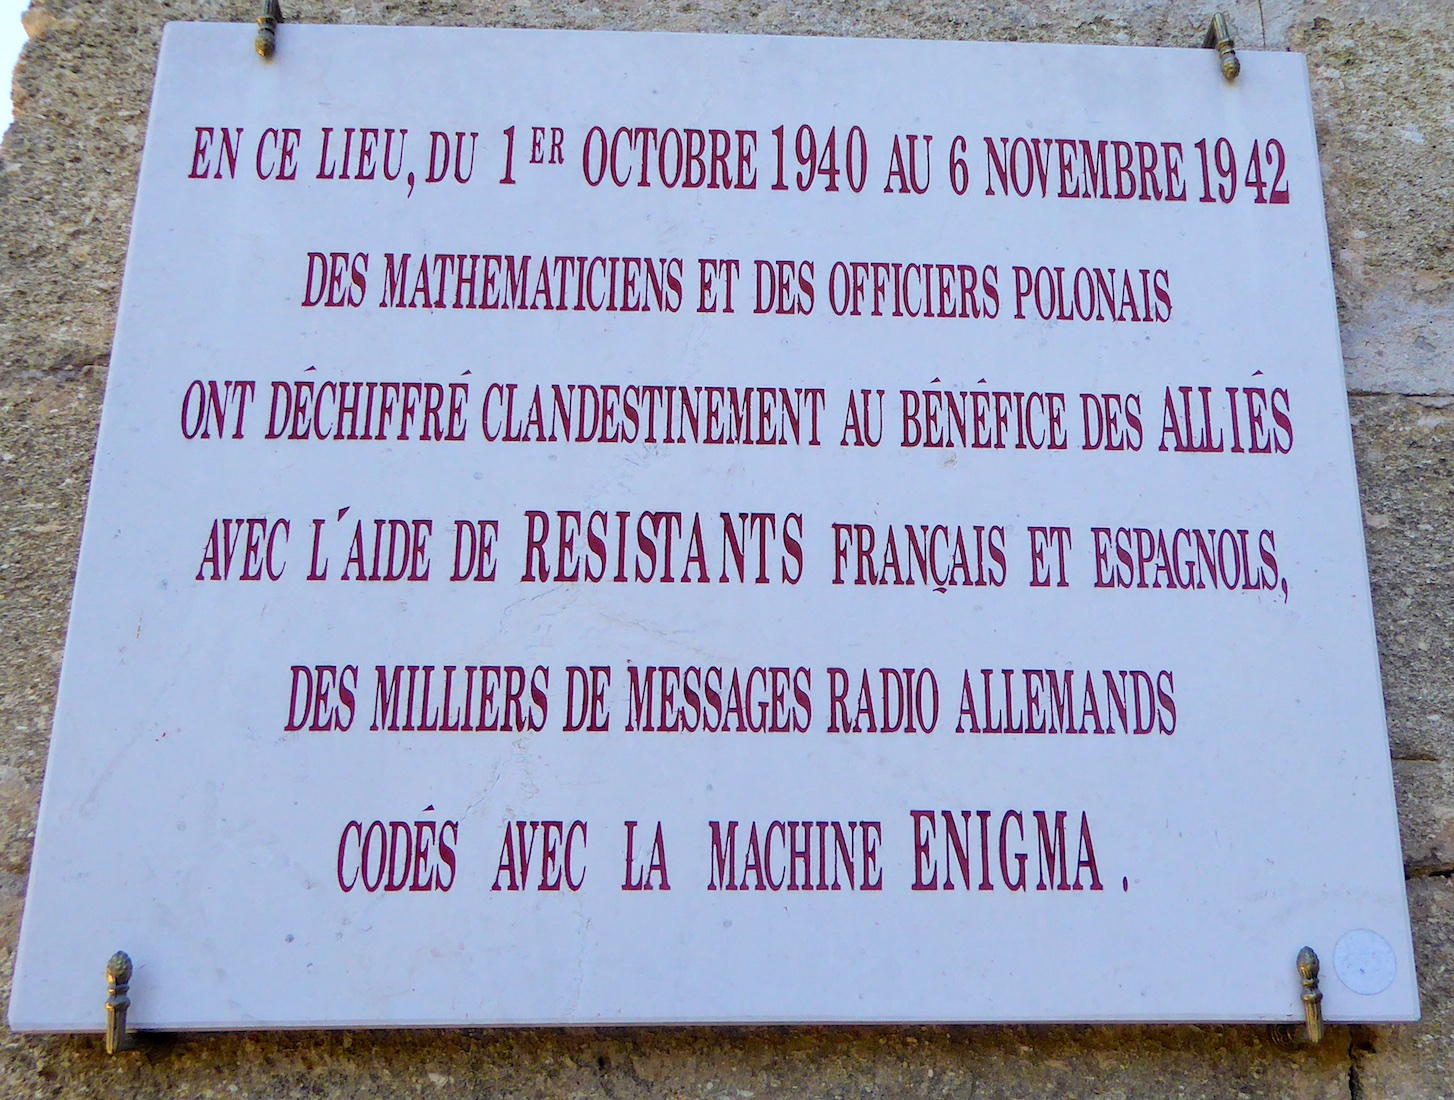 Commemorative plaque to the Polish code breakers, outside Château des Fouzes, Uzes, France, who first cracked the Enigma code